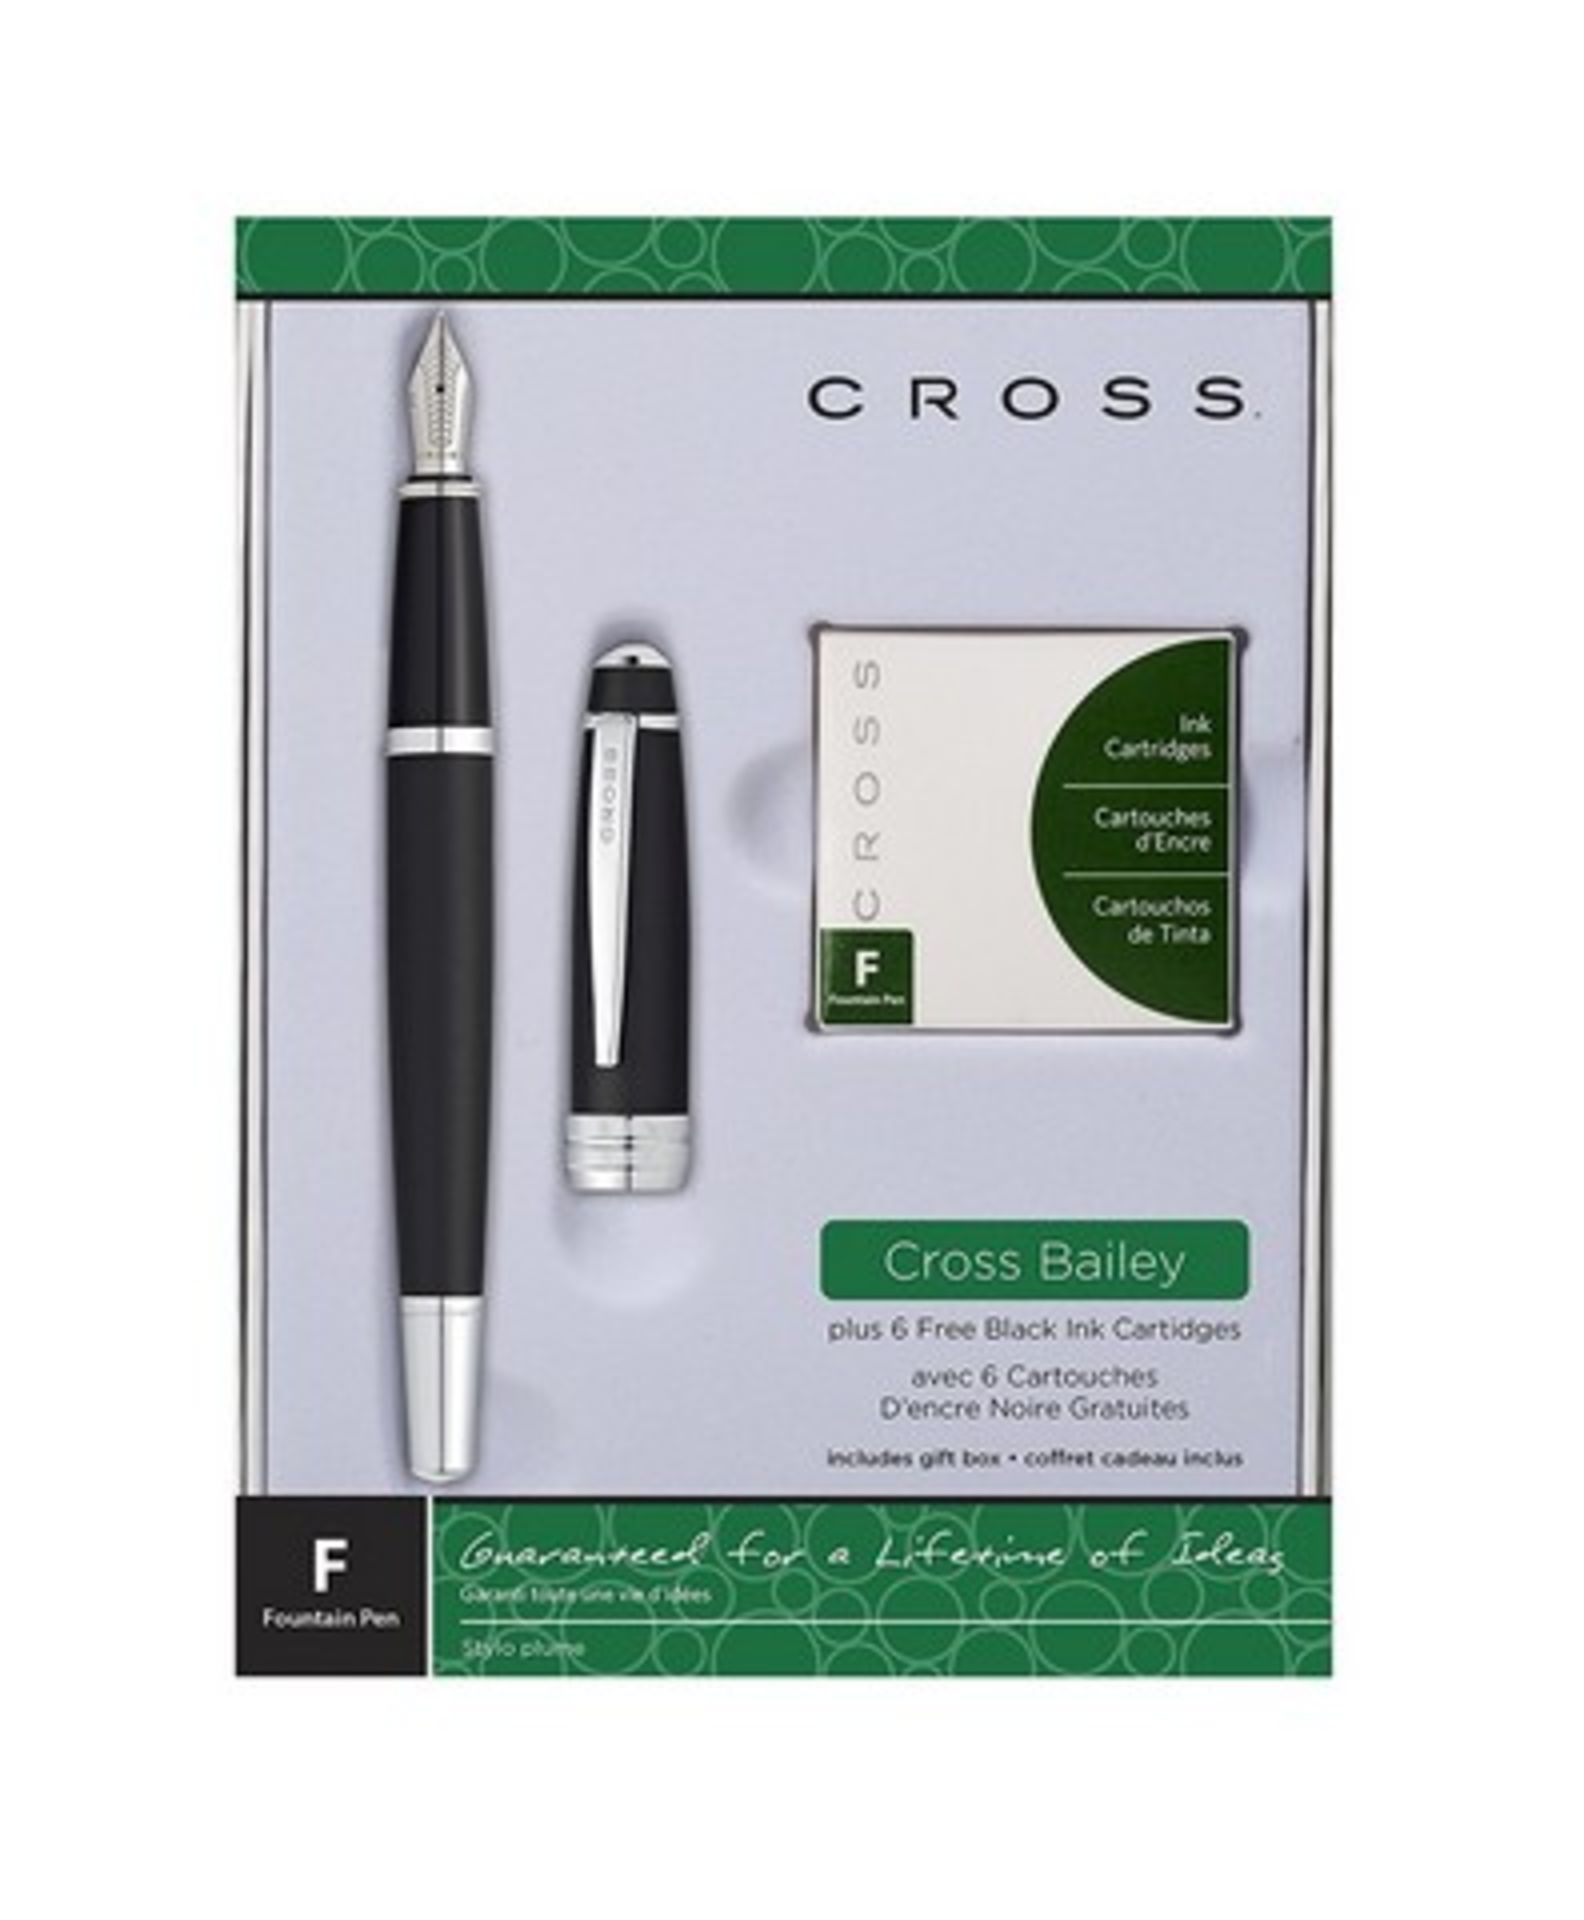 V Brand New Cross Bailey Fountain Pen In Gift with 6 Black Ink Cartridges - Online Price £41.00 (